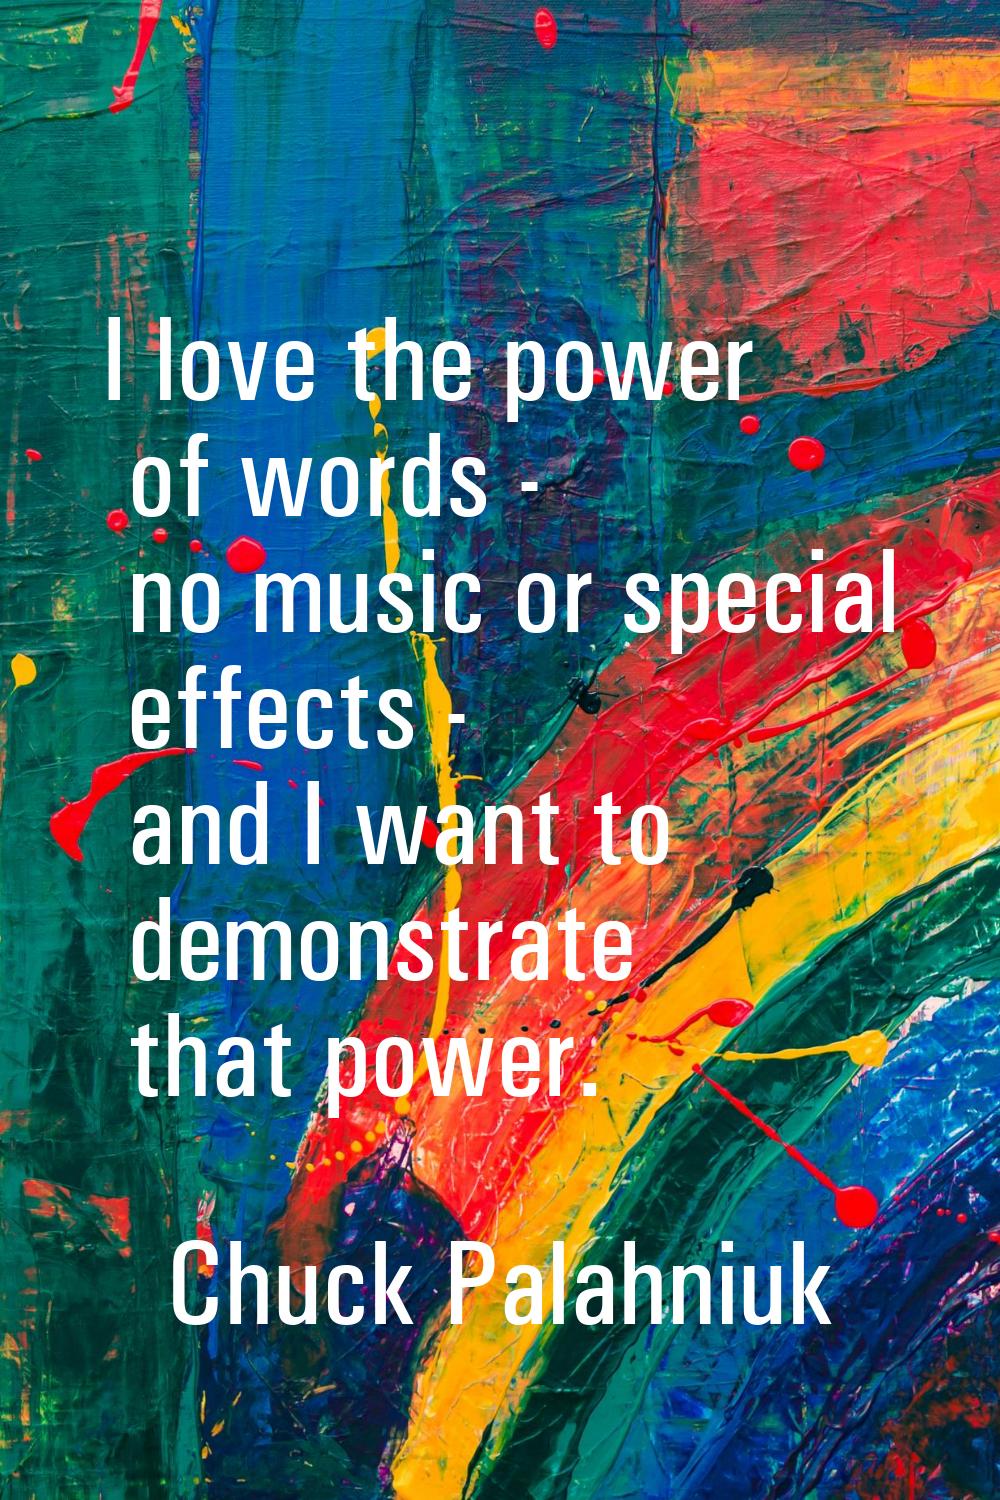 I love the power of words - no music or special effects - and I want to demonstrate that power.